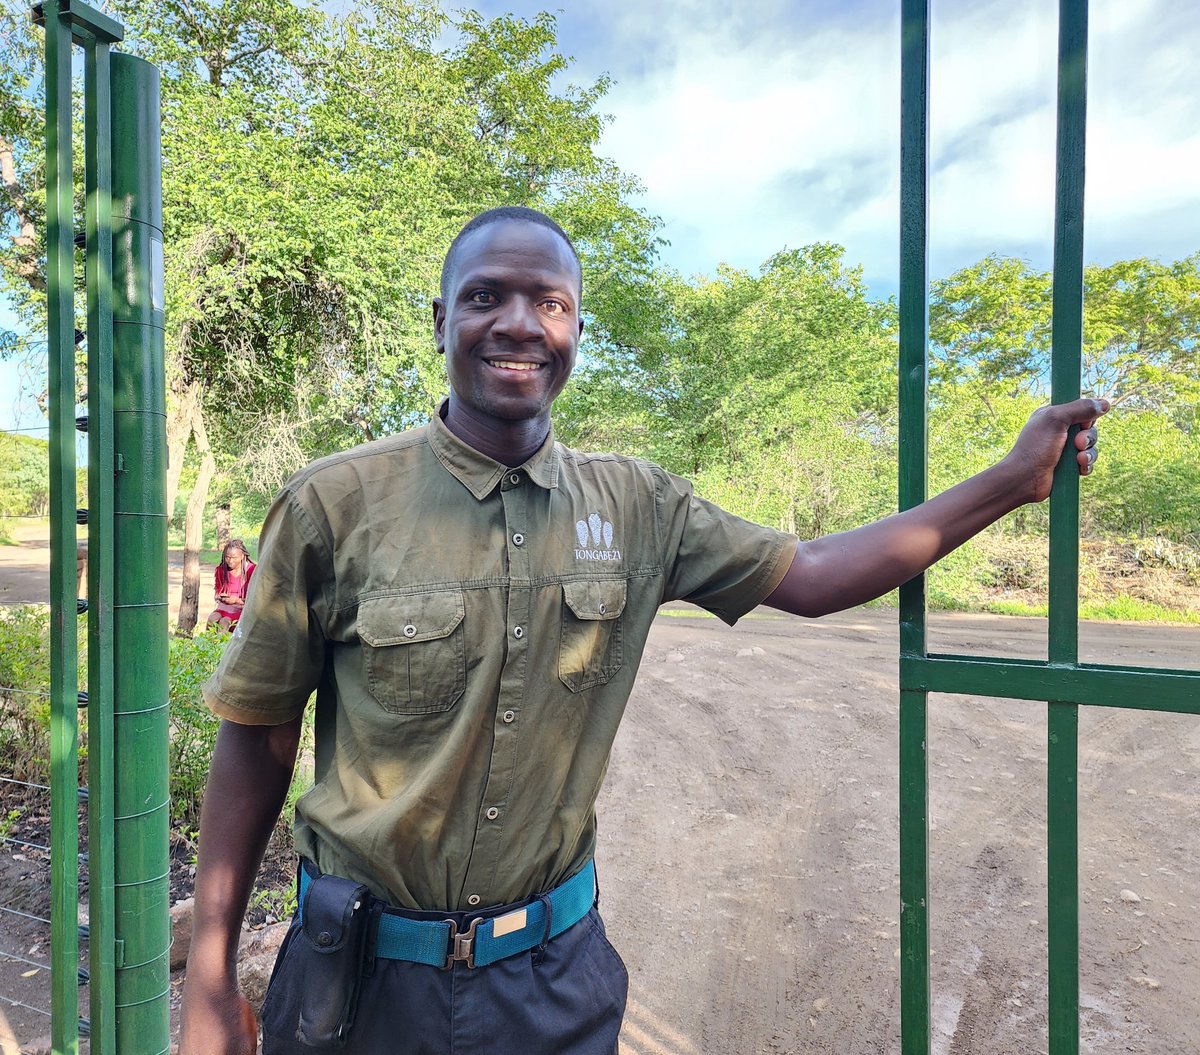 With this kind of experience, we know our guests are in safe hands with Adrian Sianjobo🦏Before he joined Tongabezi as a security officer, Adrian used to safeguard one of our most vulnerable mammals - the rhino!